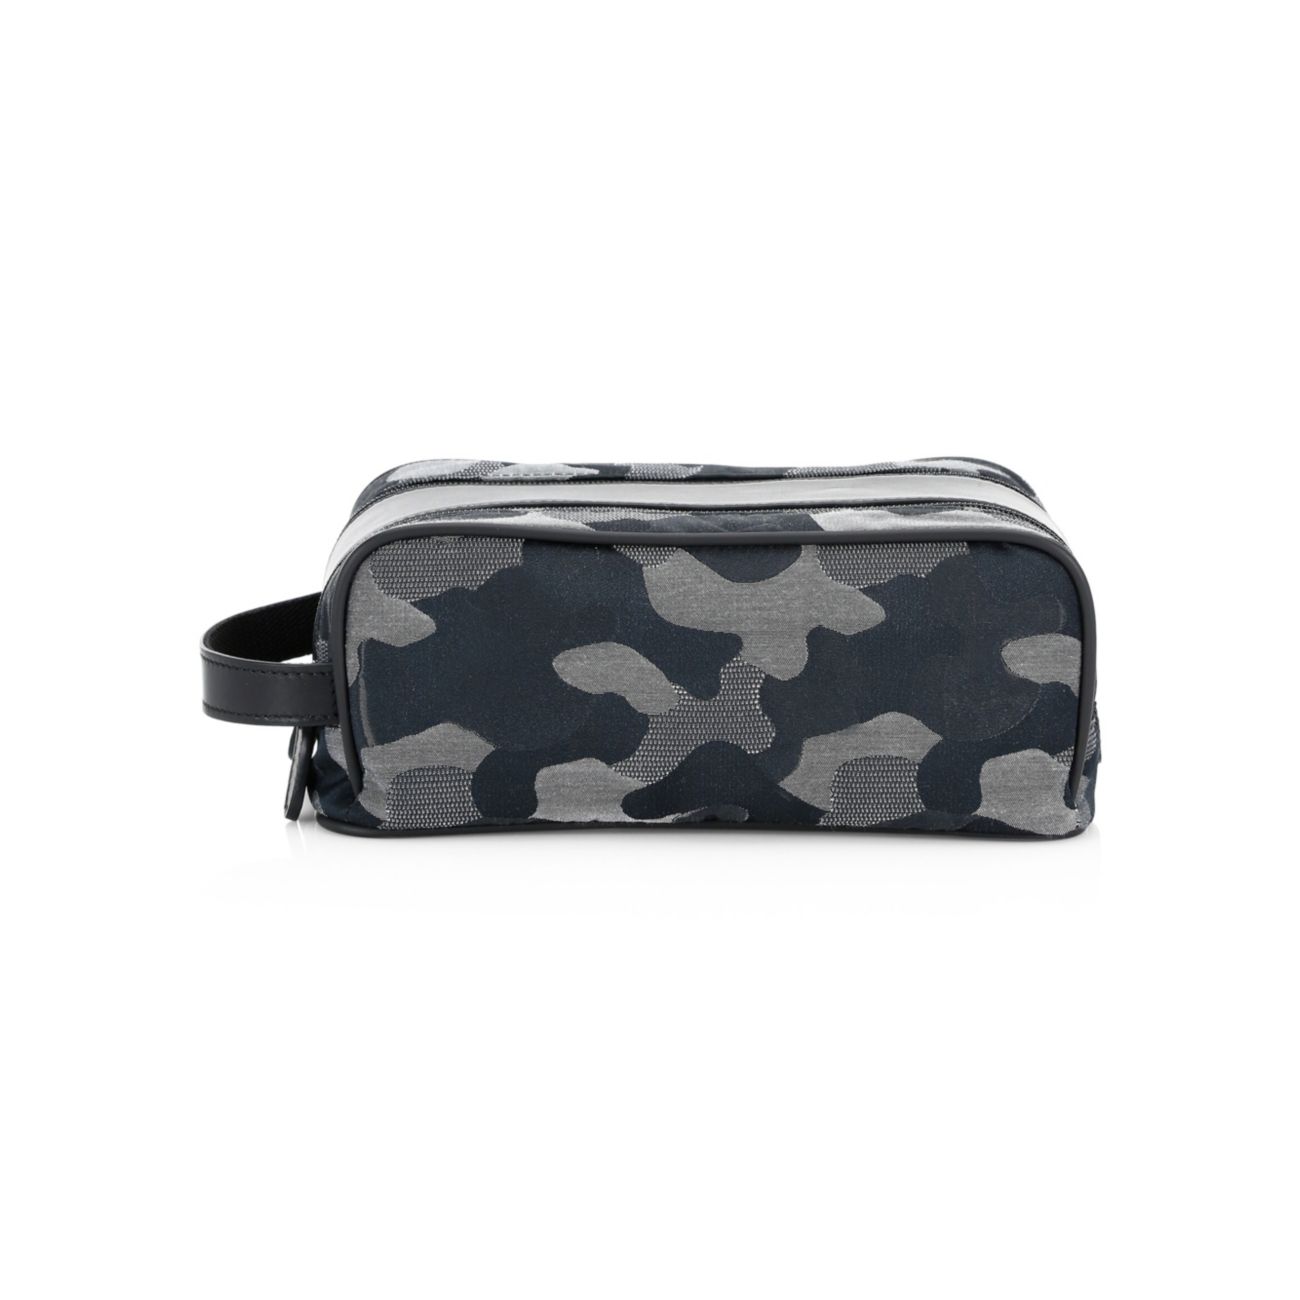 COLLECTION Camo-Print Toiletry Kit Saks Fifth Avenue